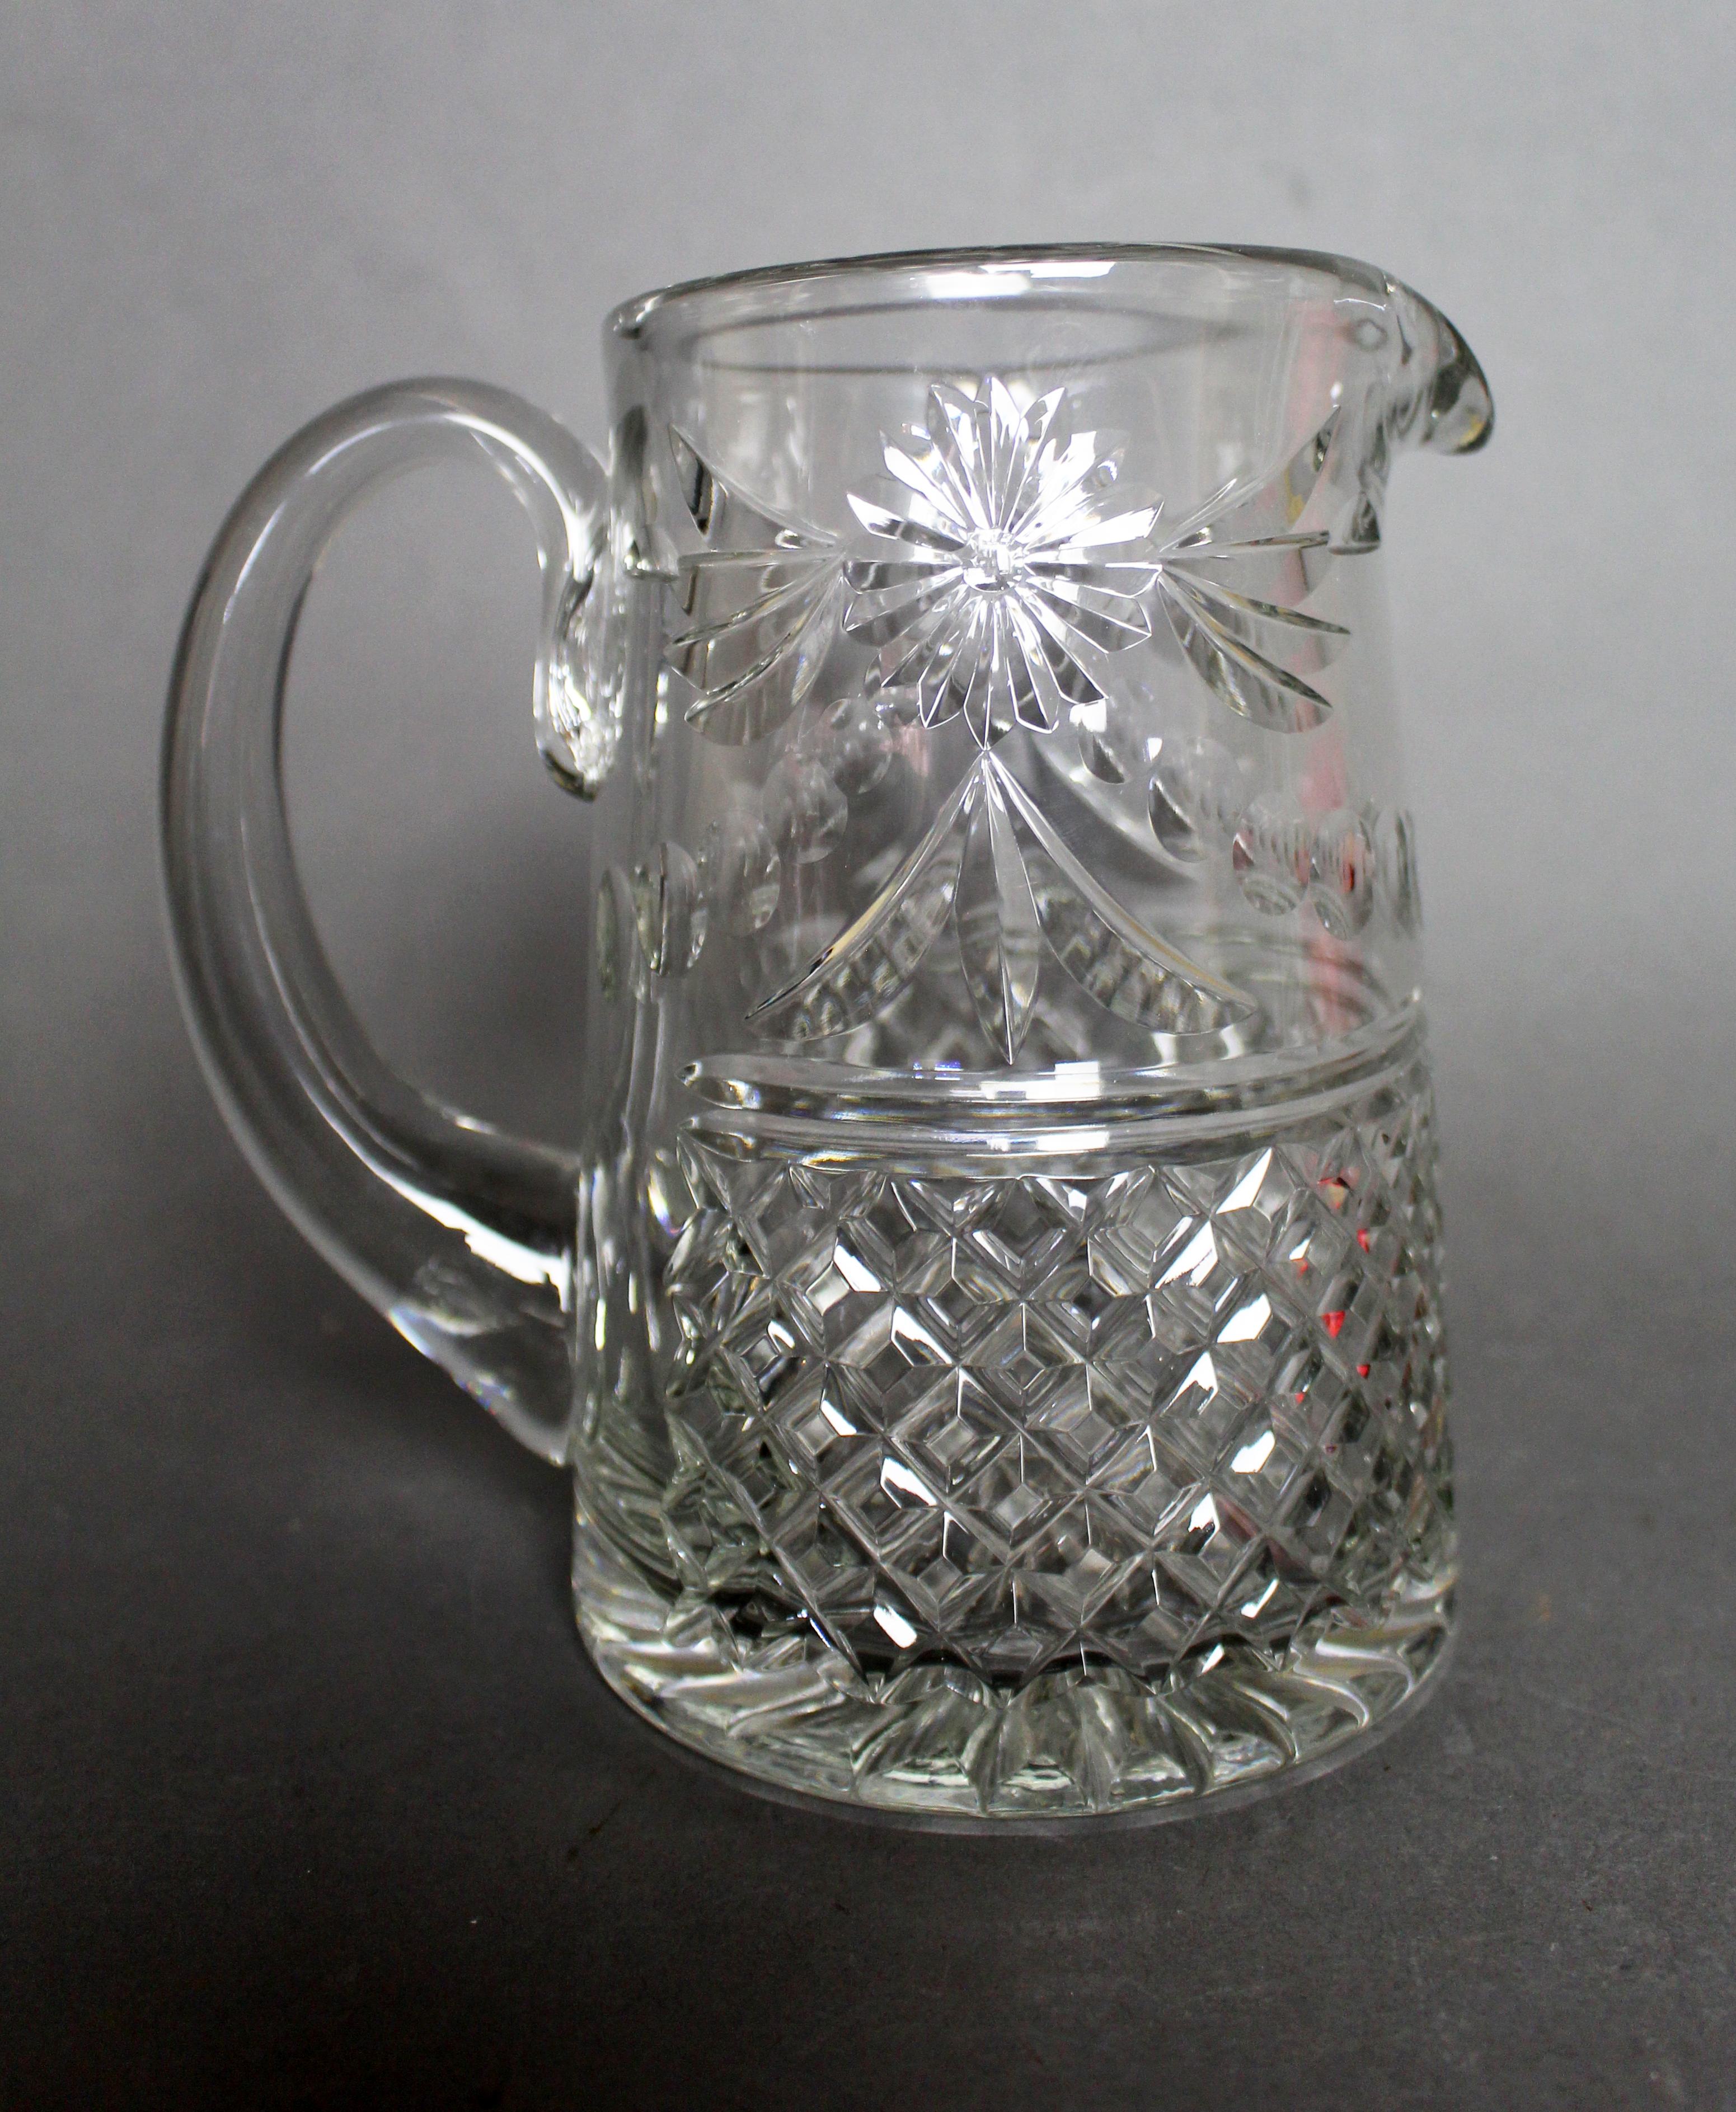 Fine Stuart Beaconsfield cut glass 1 litre jug


Measures 16 x 11 x 16 (height) cm

Offered a beautiful hand cut crystal glass by Stuart Crystal, Stourbridge

Beaconsfield pattern.

Excellent condition. No chips, cracks or repairs. Etched